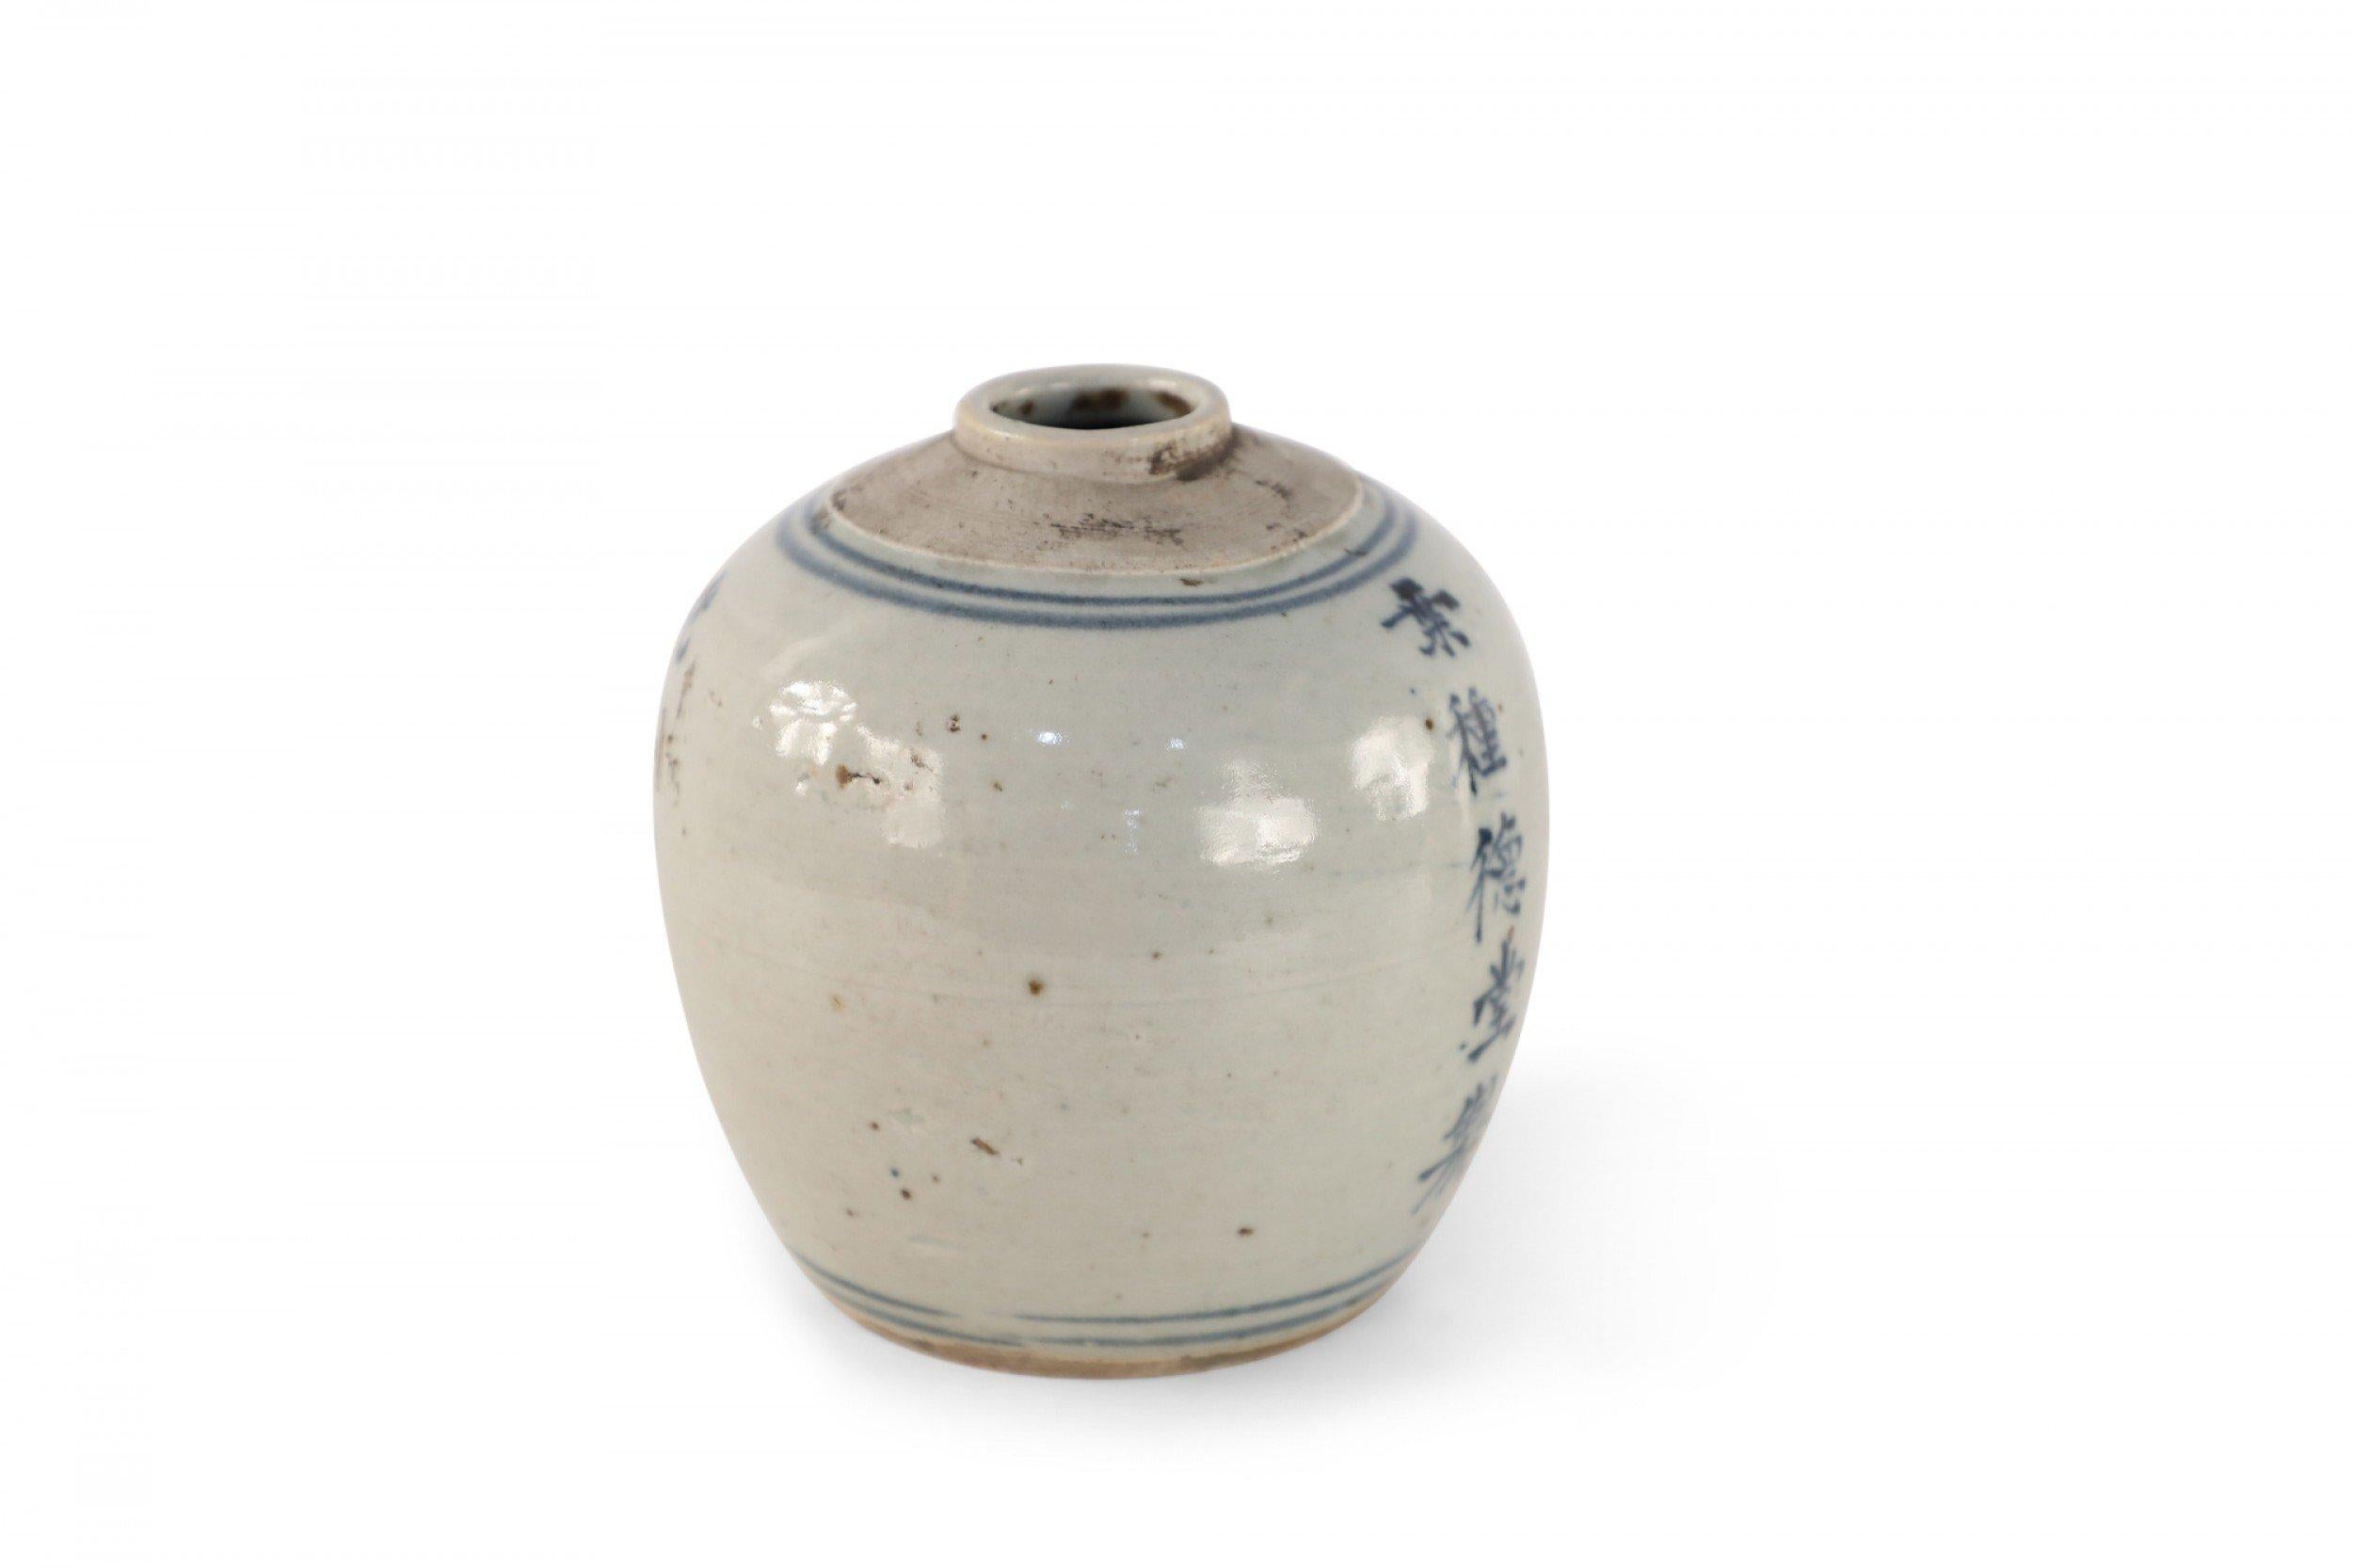 Antique Chinese (early 20th century) small, earthenware jar with blue characters running down the center framed by thin stripes circling the top and base.
     